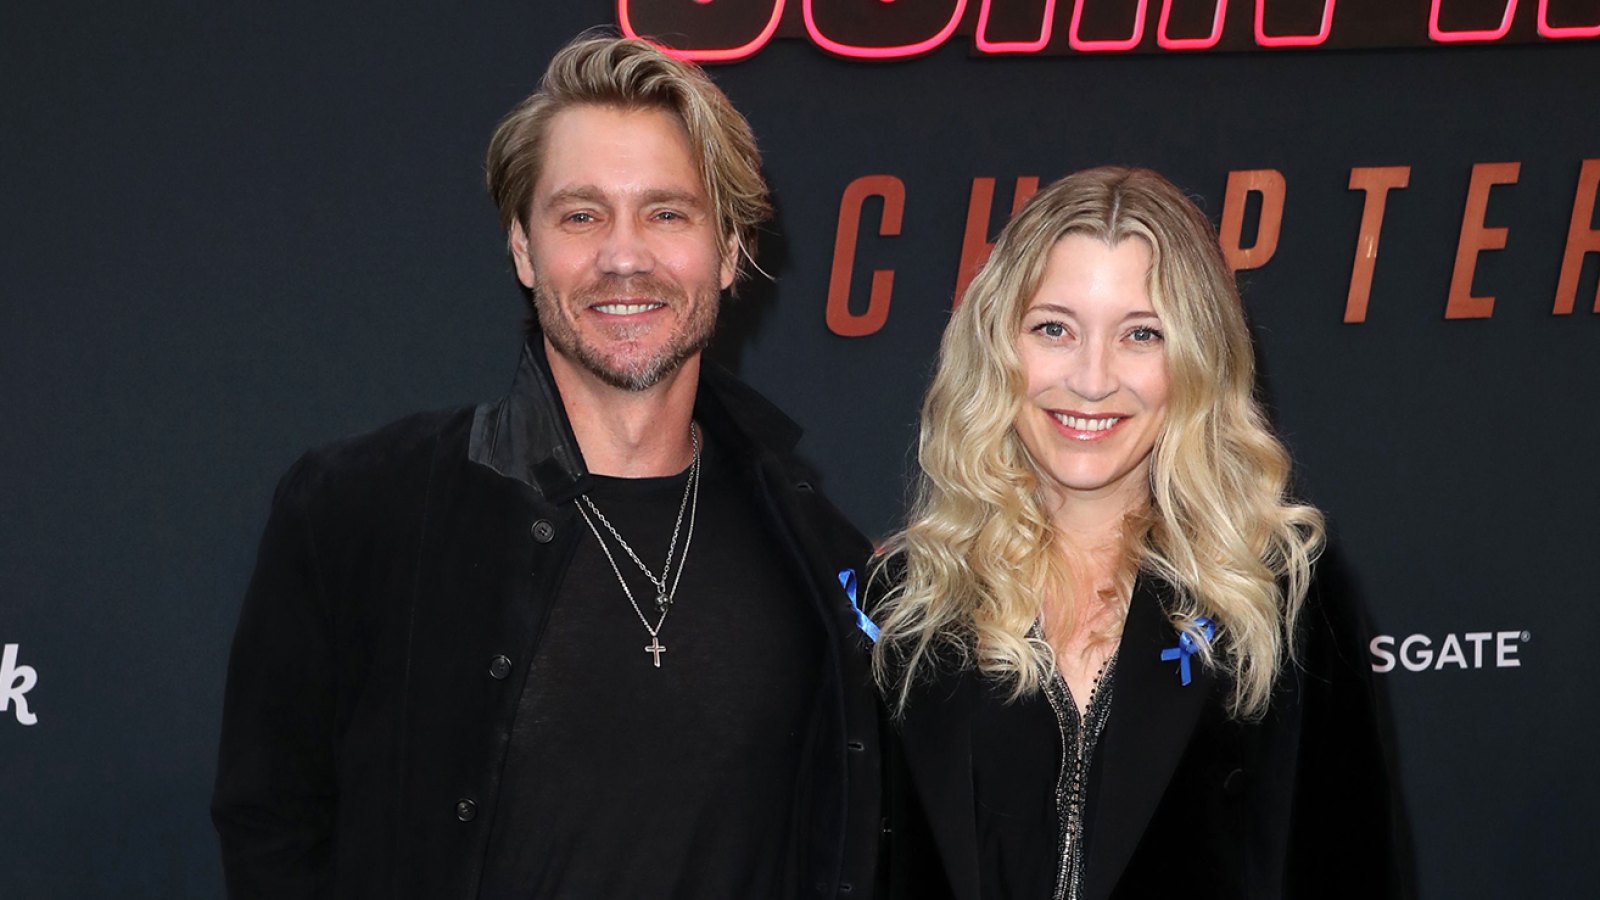 Chad Michael Murray's Wife Sarah Roemer Is Pregnant With Baby No. 3: See Bump Photo